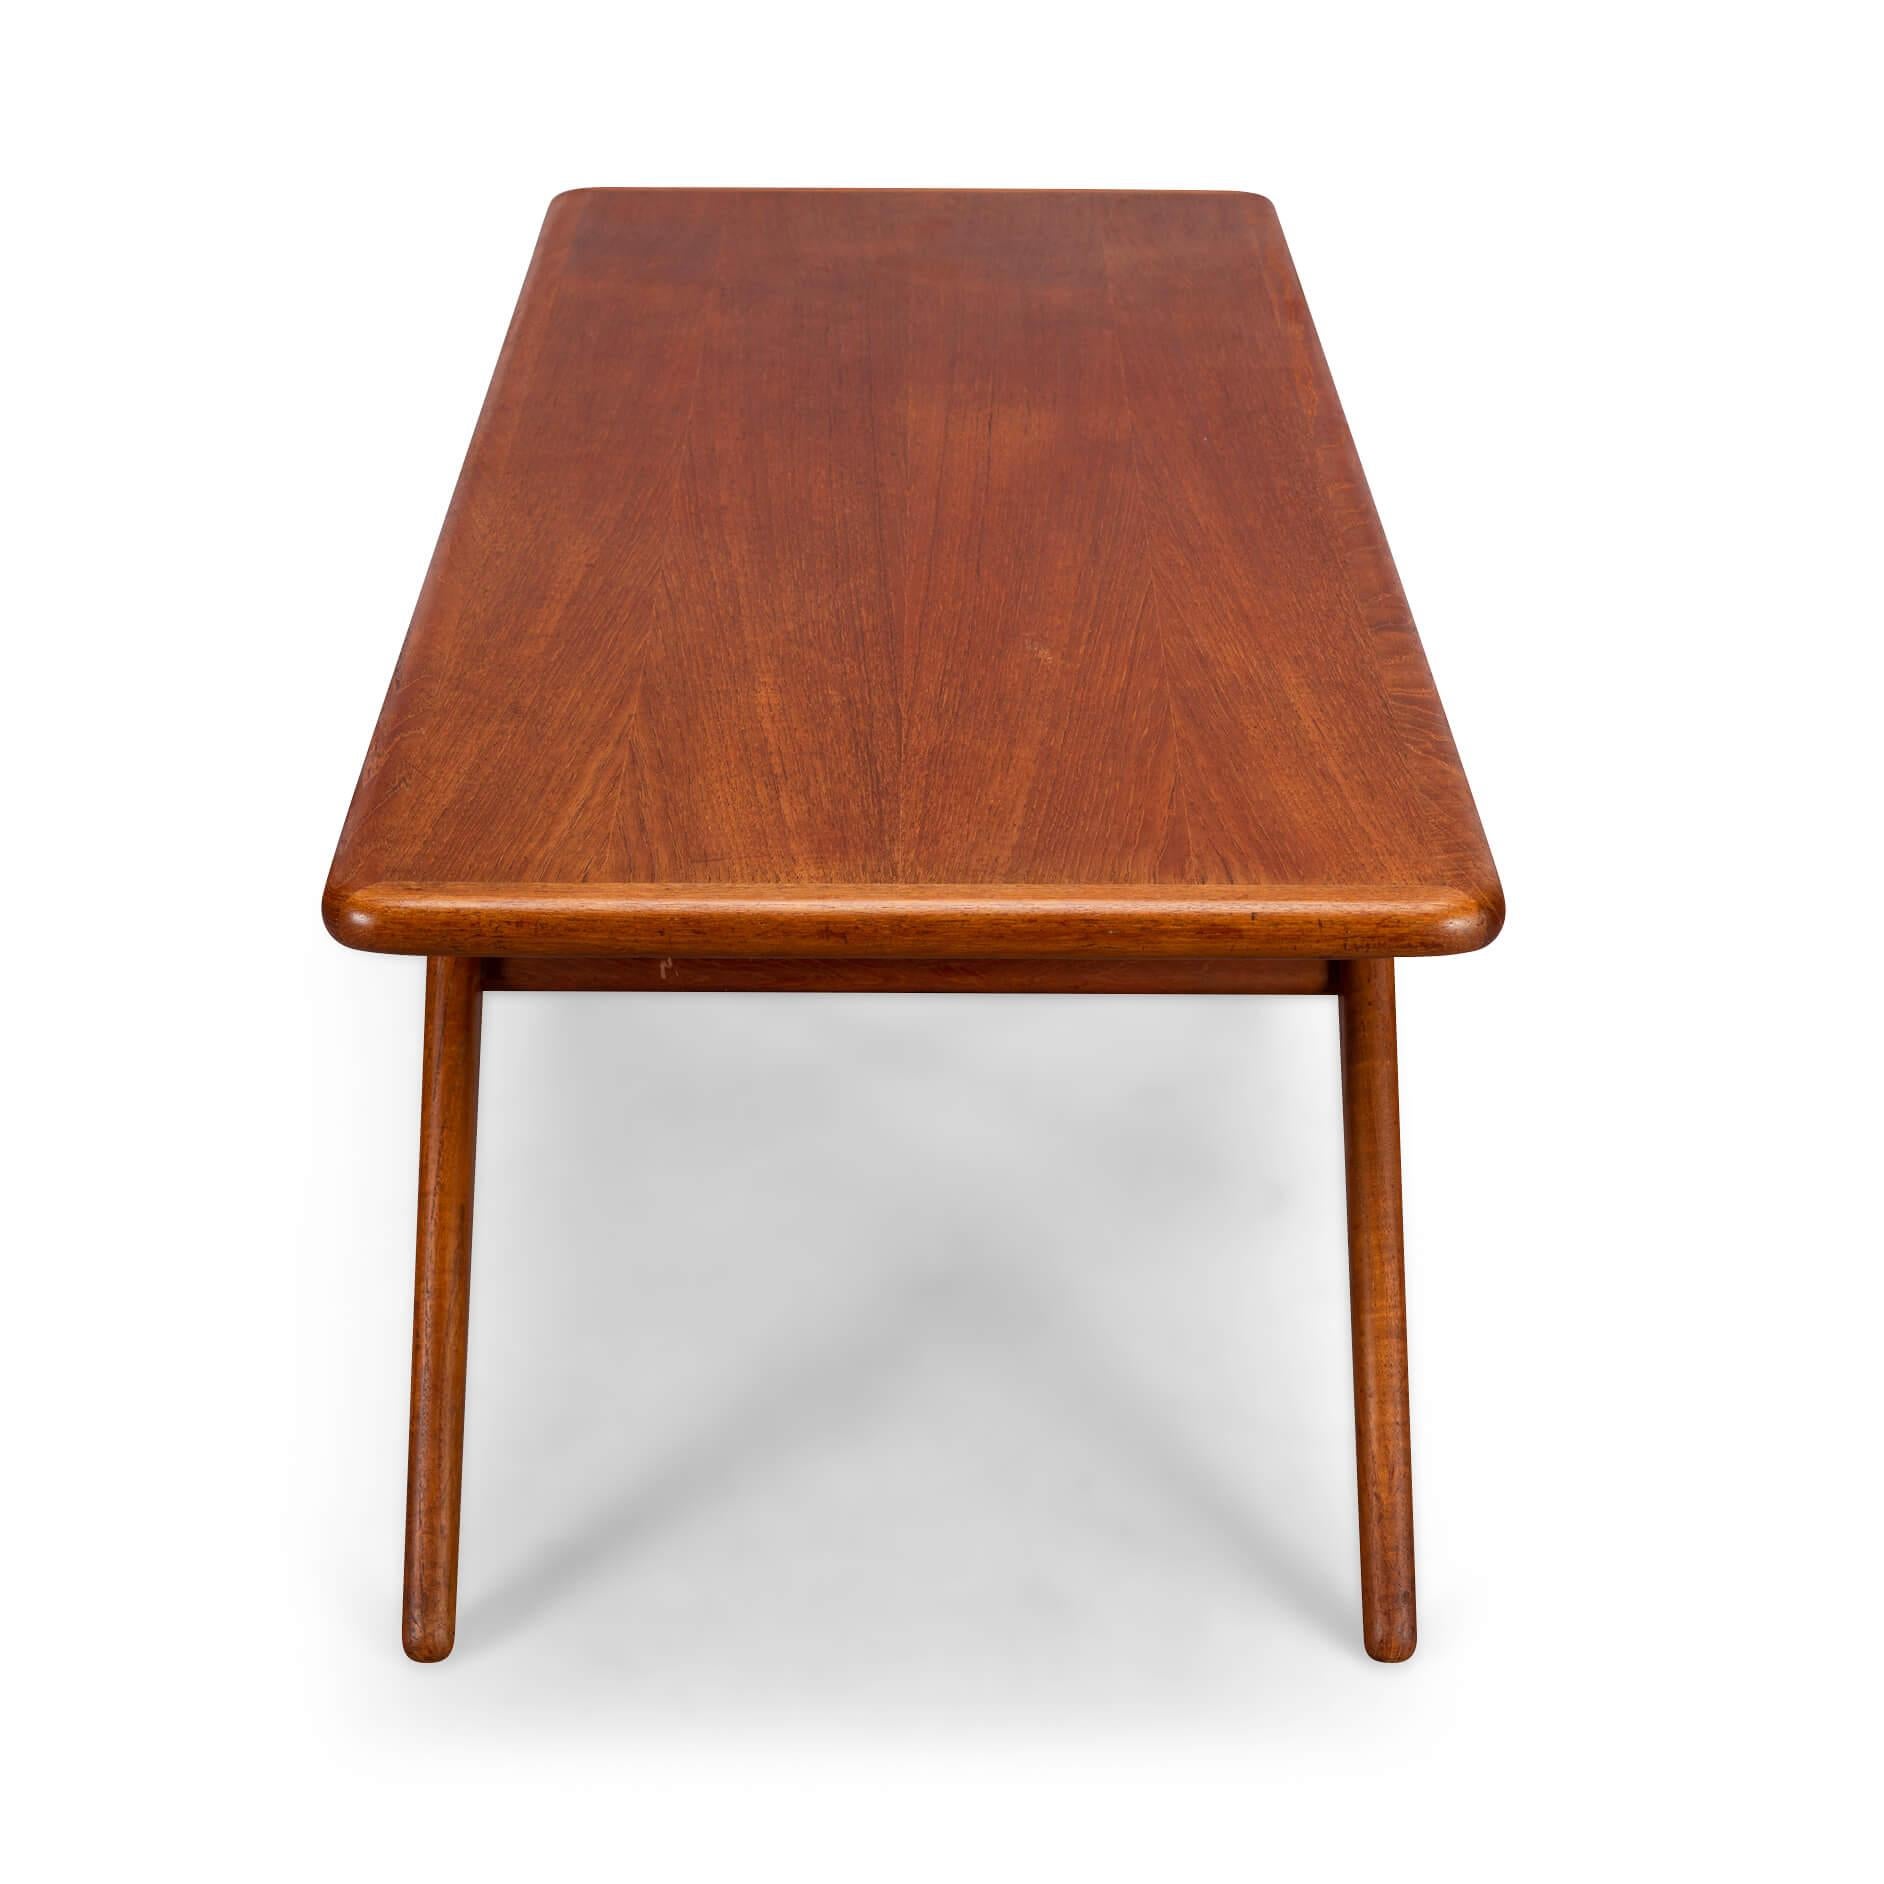 Smile table!
The iconic Danish, Johannes Andersen, CFC, teak ’Smile’ coffee table, Denmark, 1960s The ’Smile’ coffee table, designed by Johannes Andersen in Denmark in 1957 and manufactured in the late 1950s-early 1960s by CFc Silkeborg. The coffee